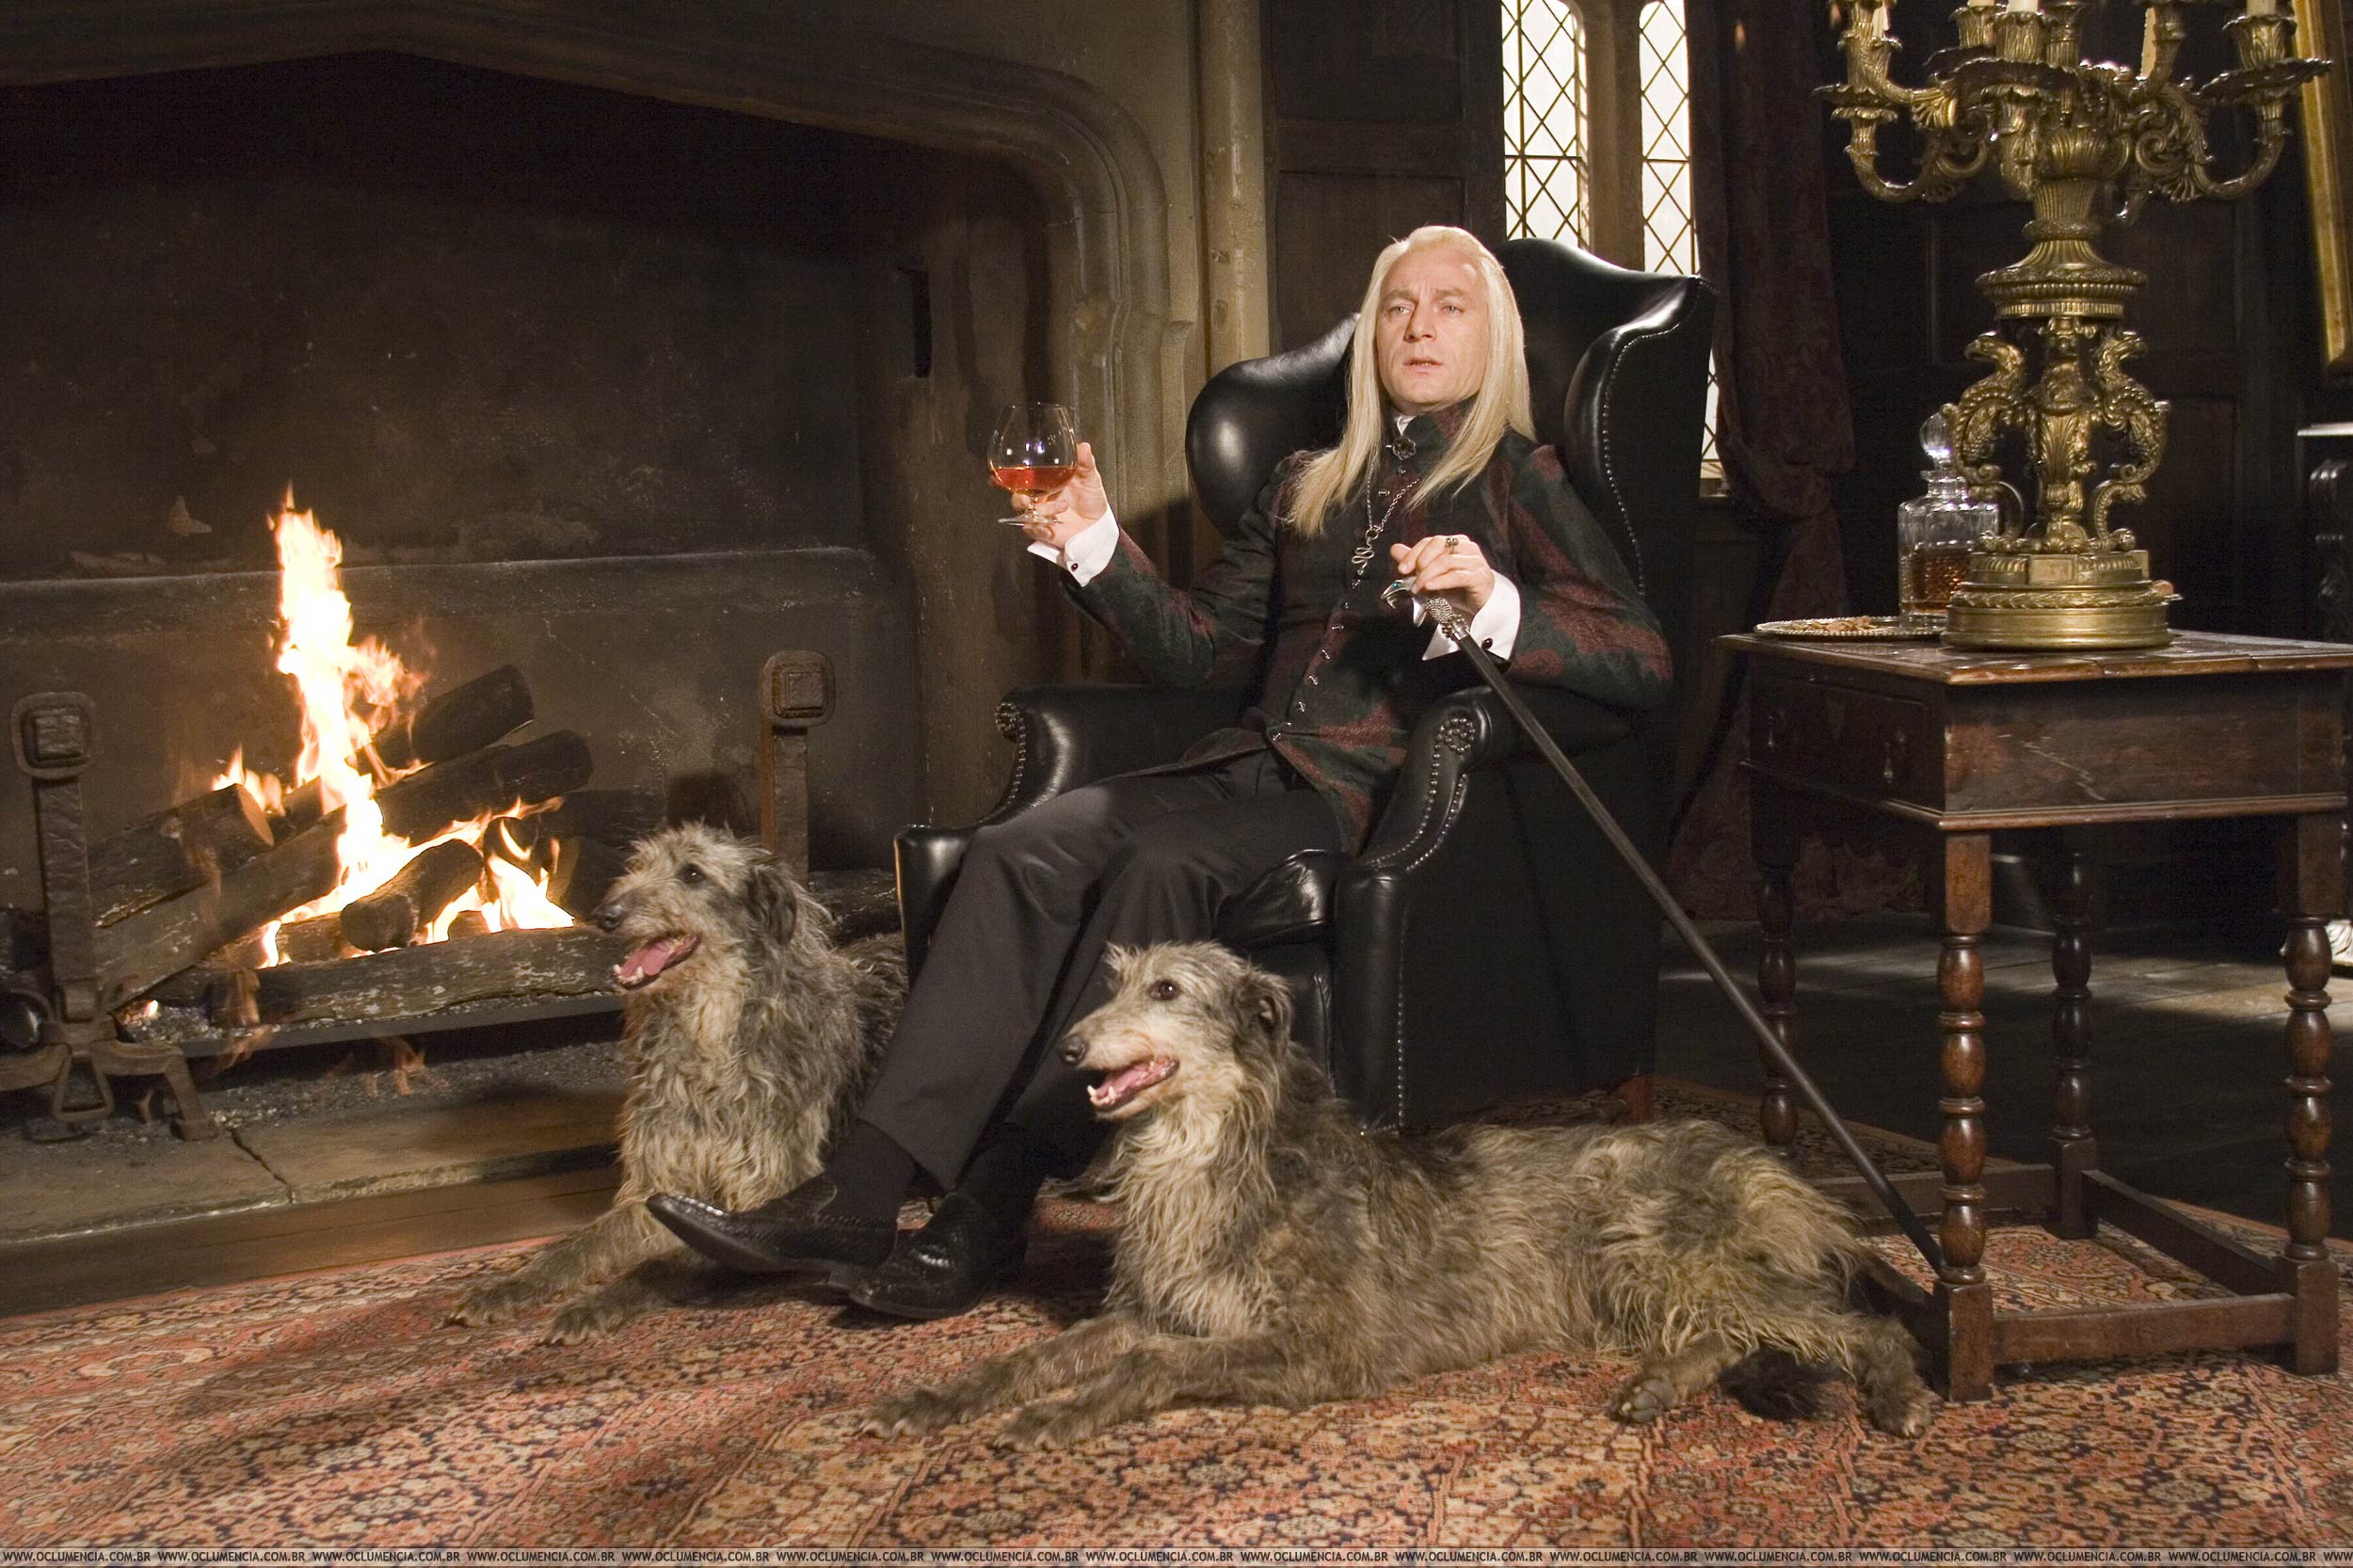 dogs, Harry Potter, Jason Isaacs, Lucius Malfoy, Death Eaters, fireplaces - desktop wallpaper